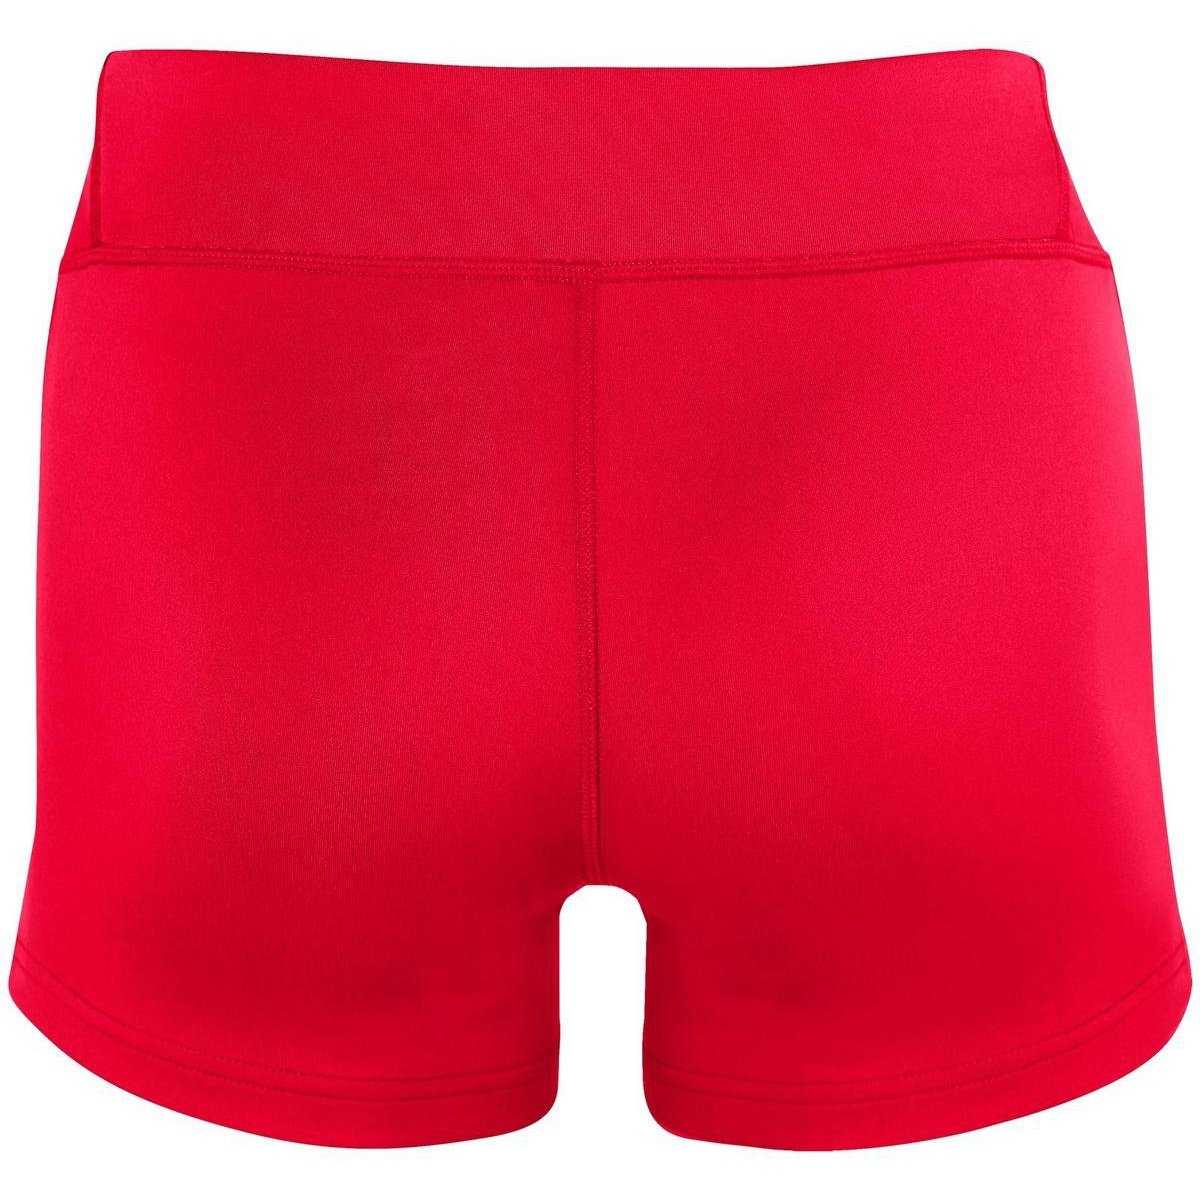 Mizuno Girls Victory 3.5" Inseam Volleyball Shorts - Red - HIT a Double